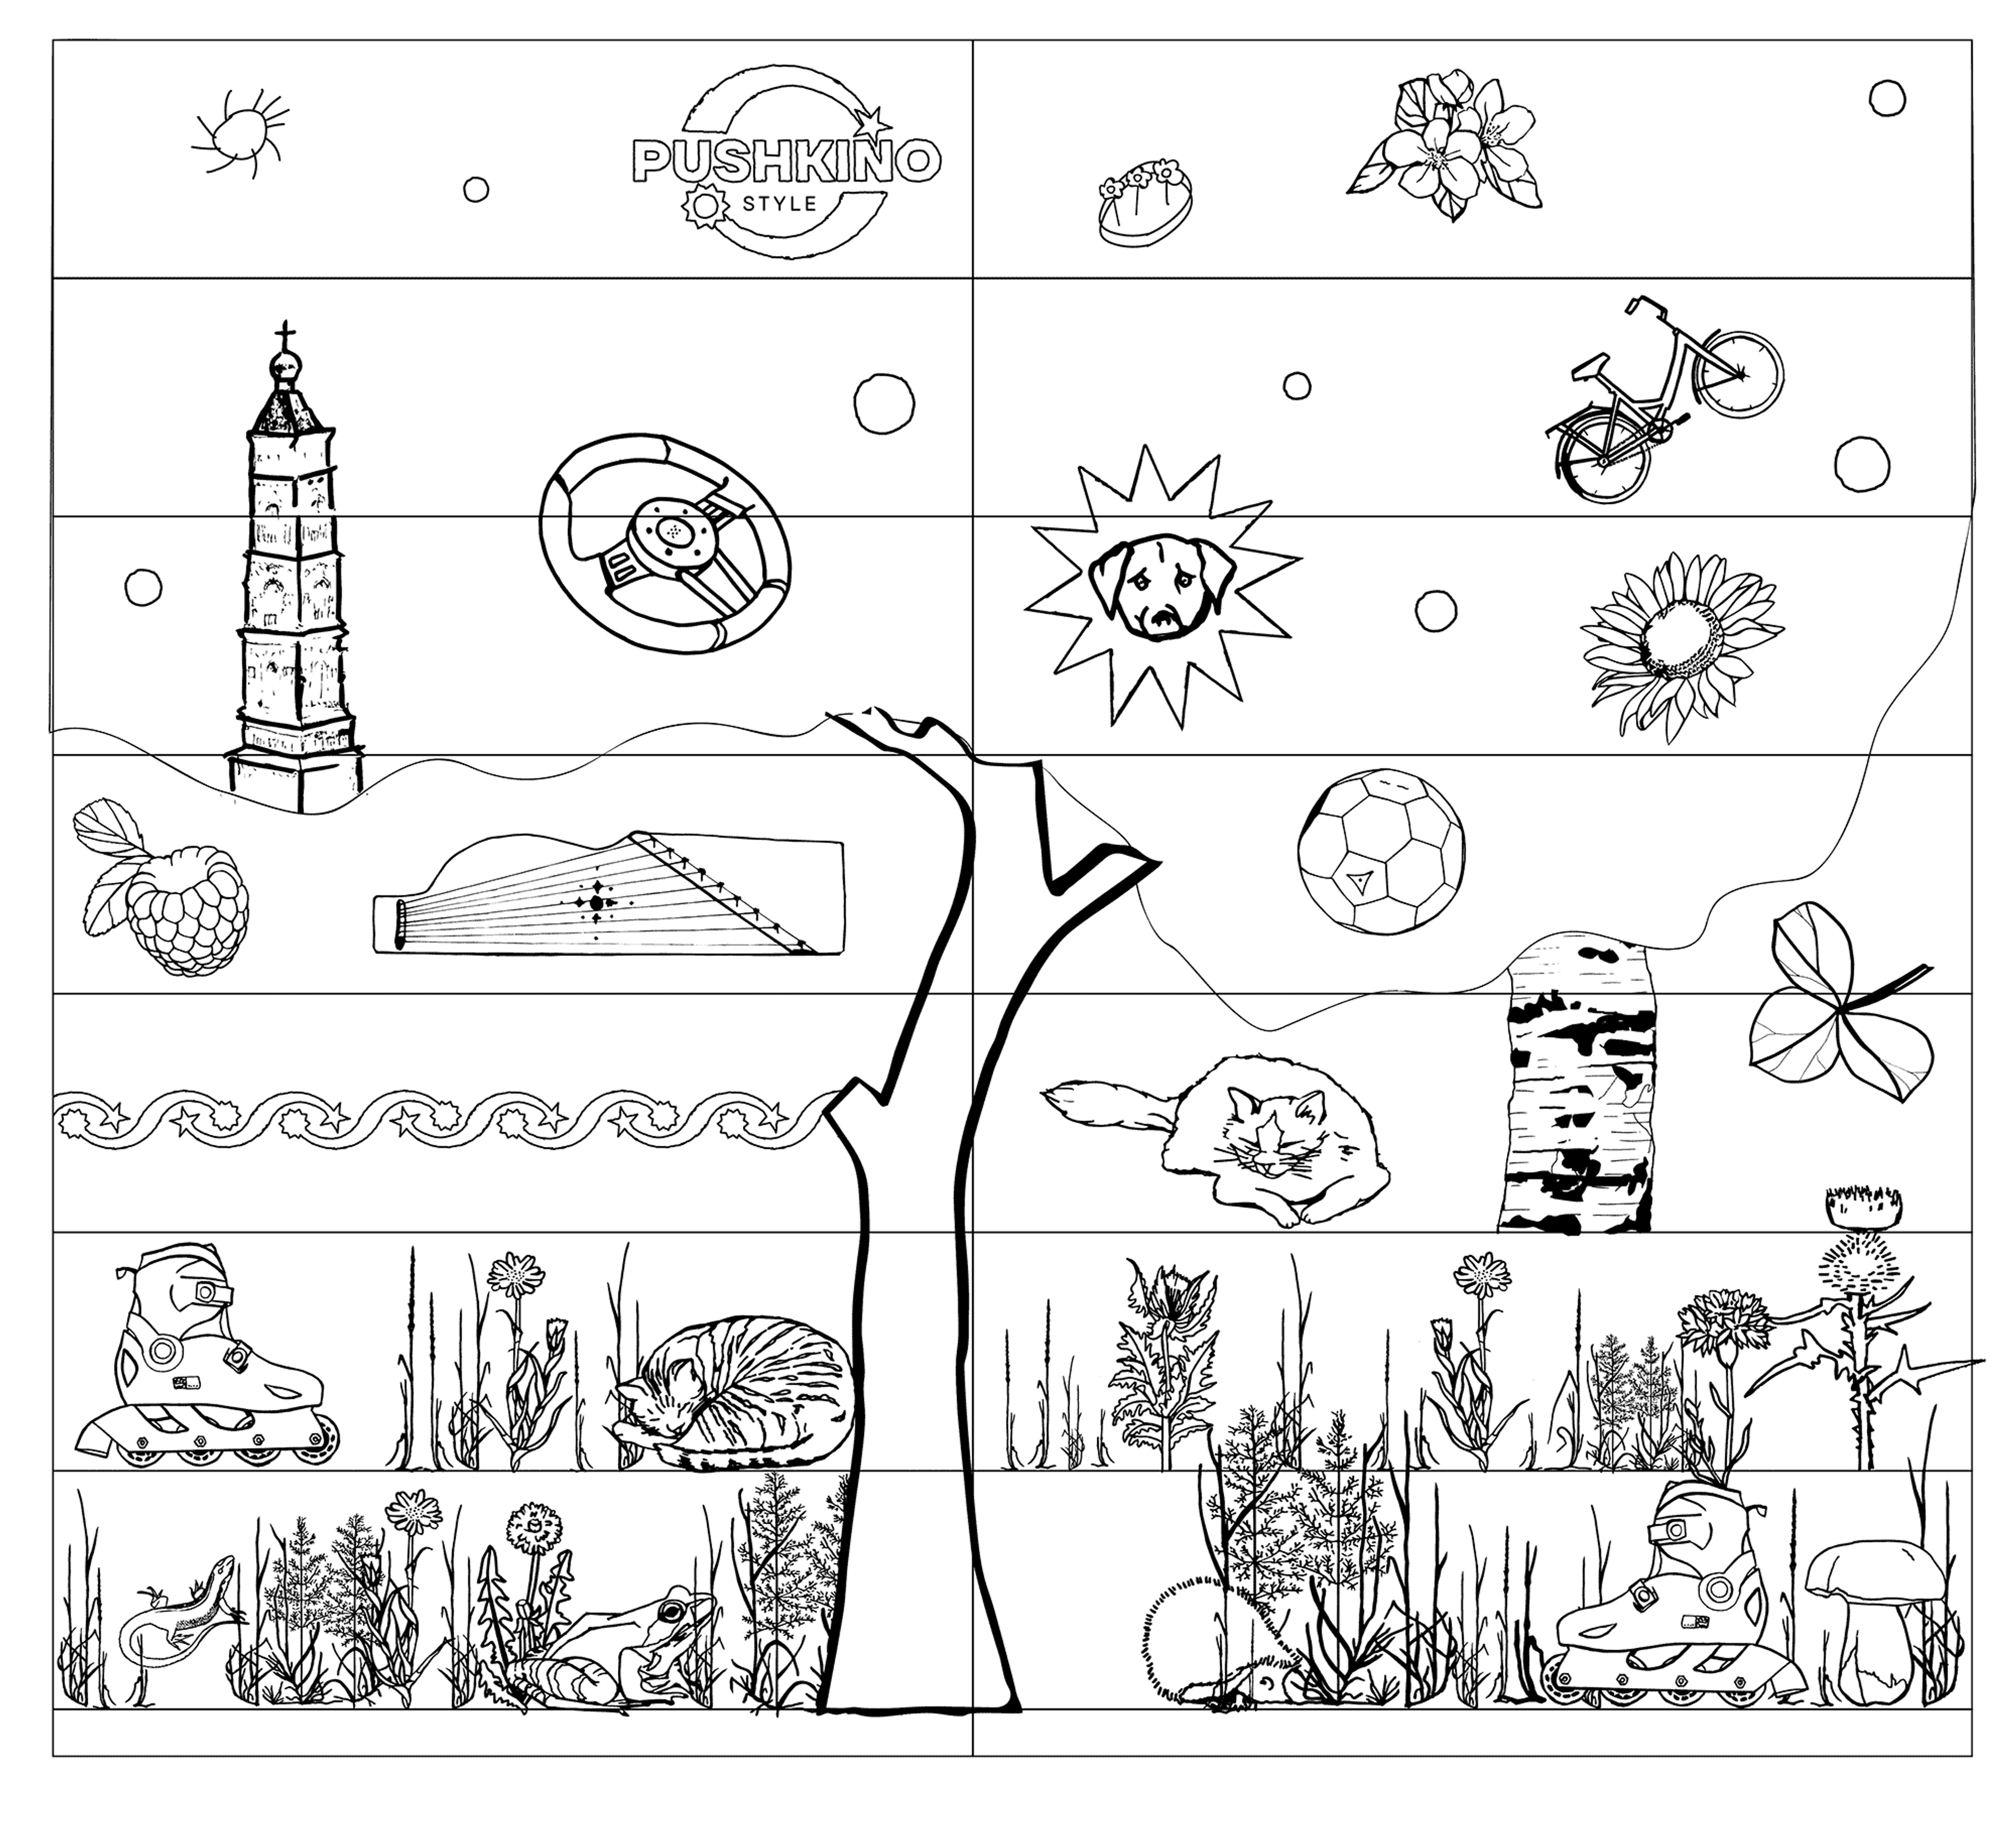 Different objects that are drawn as line drawings are arranged across a white square. They include grass, a cat, toys and a large tree.